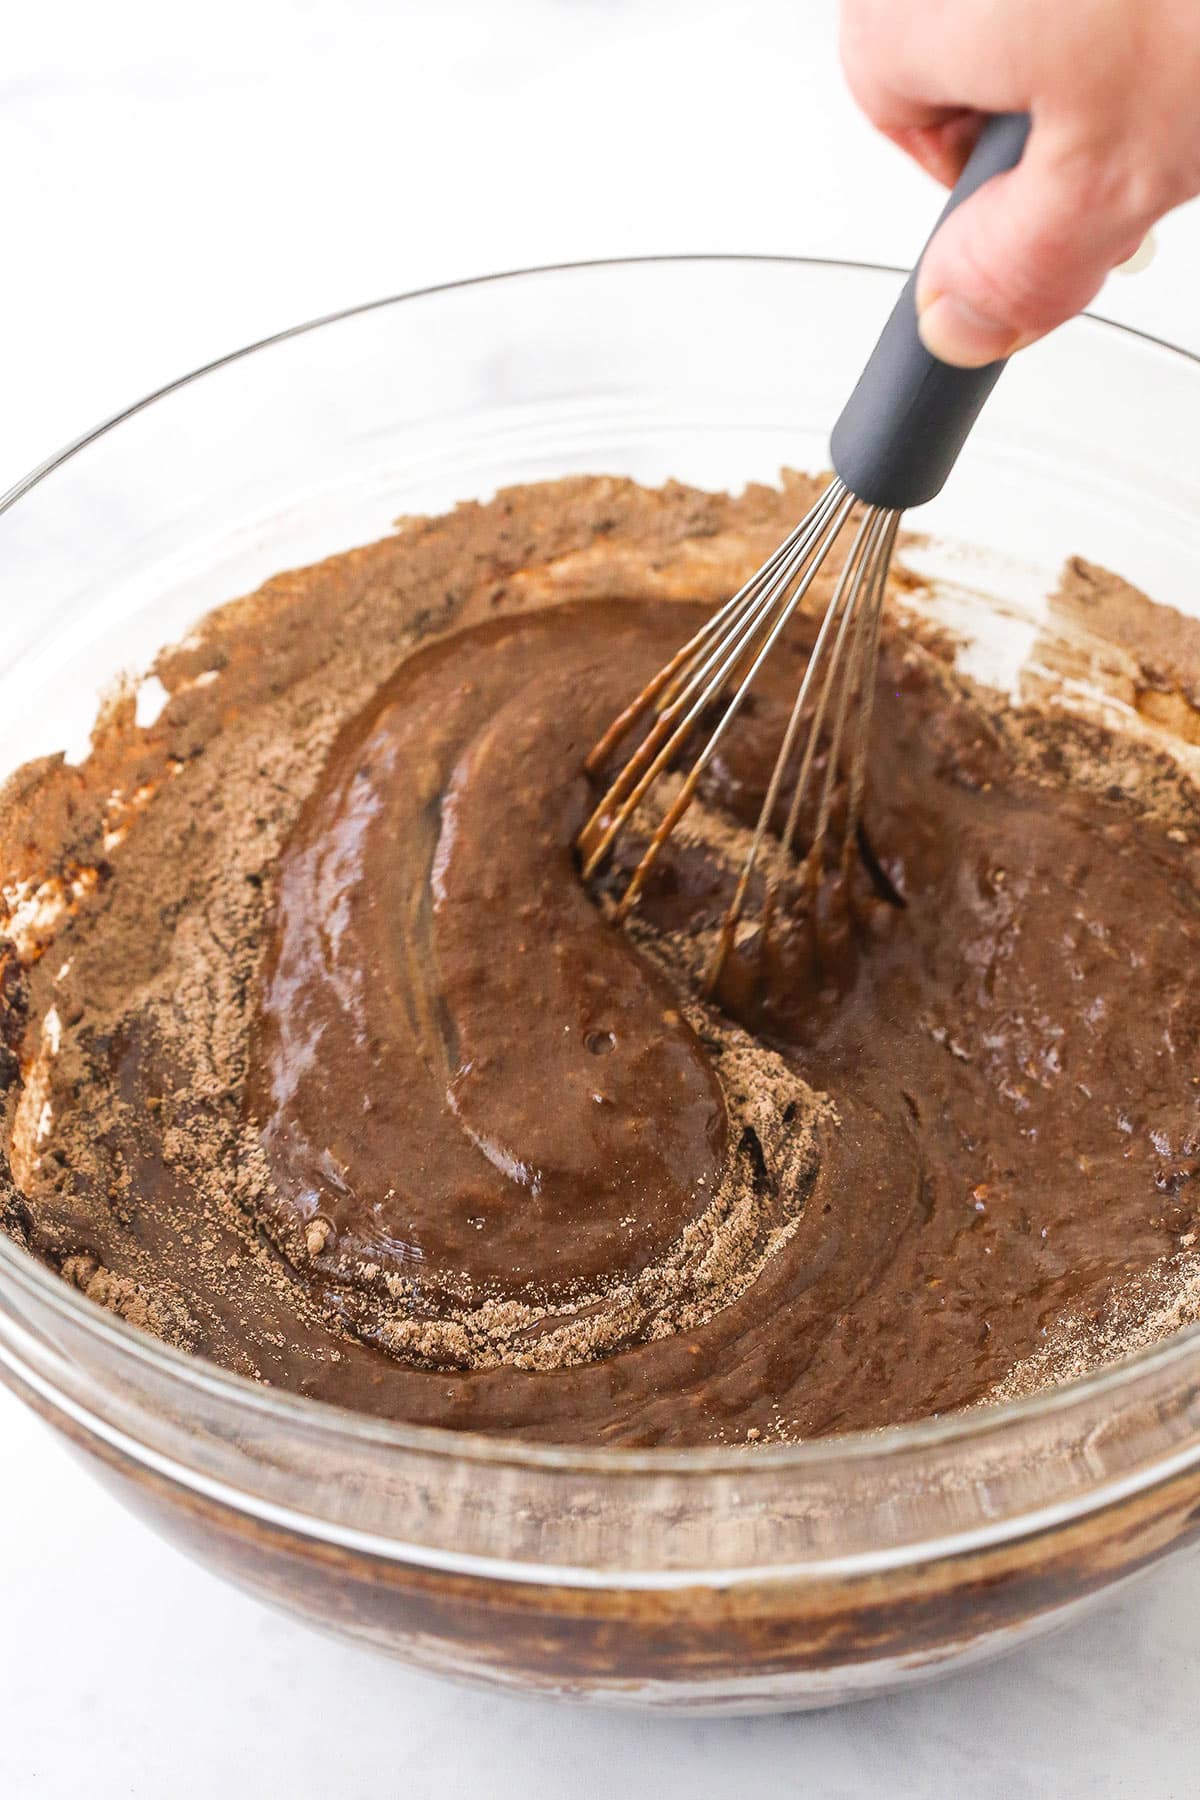 A whisk mixing chocolate cake batter in a glass bowl